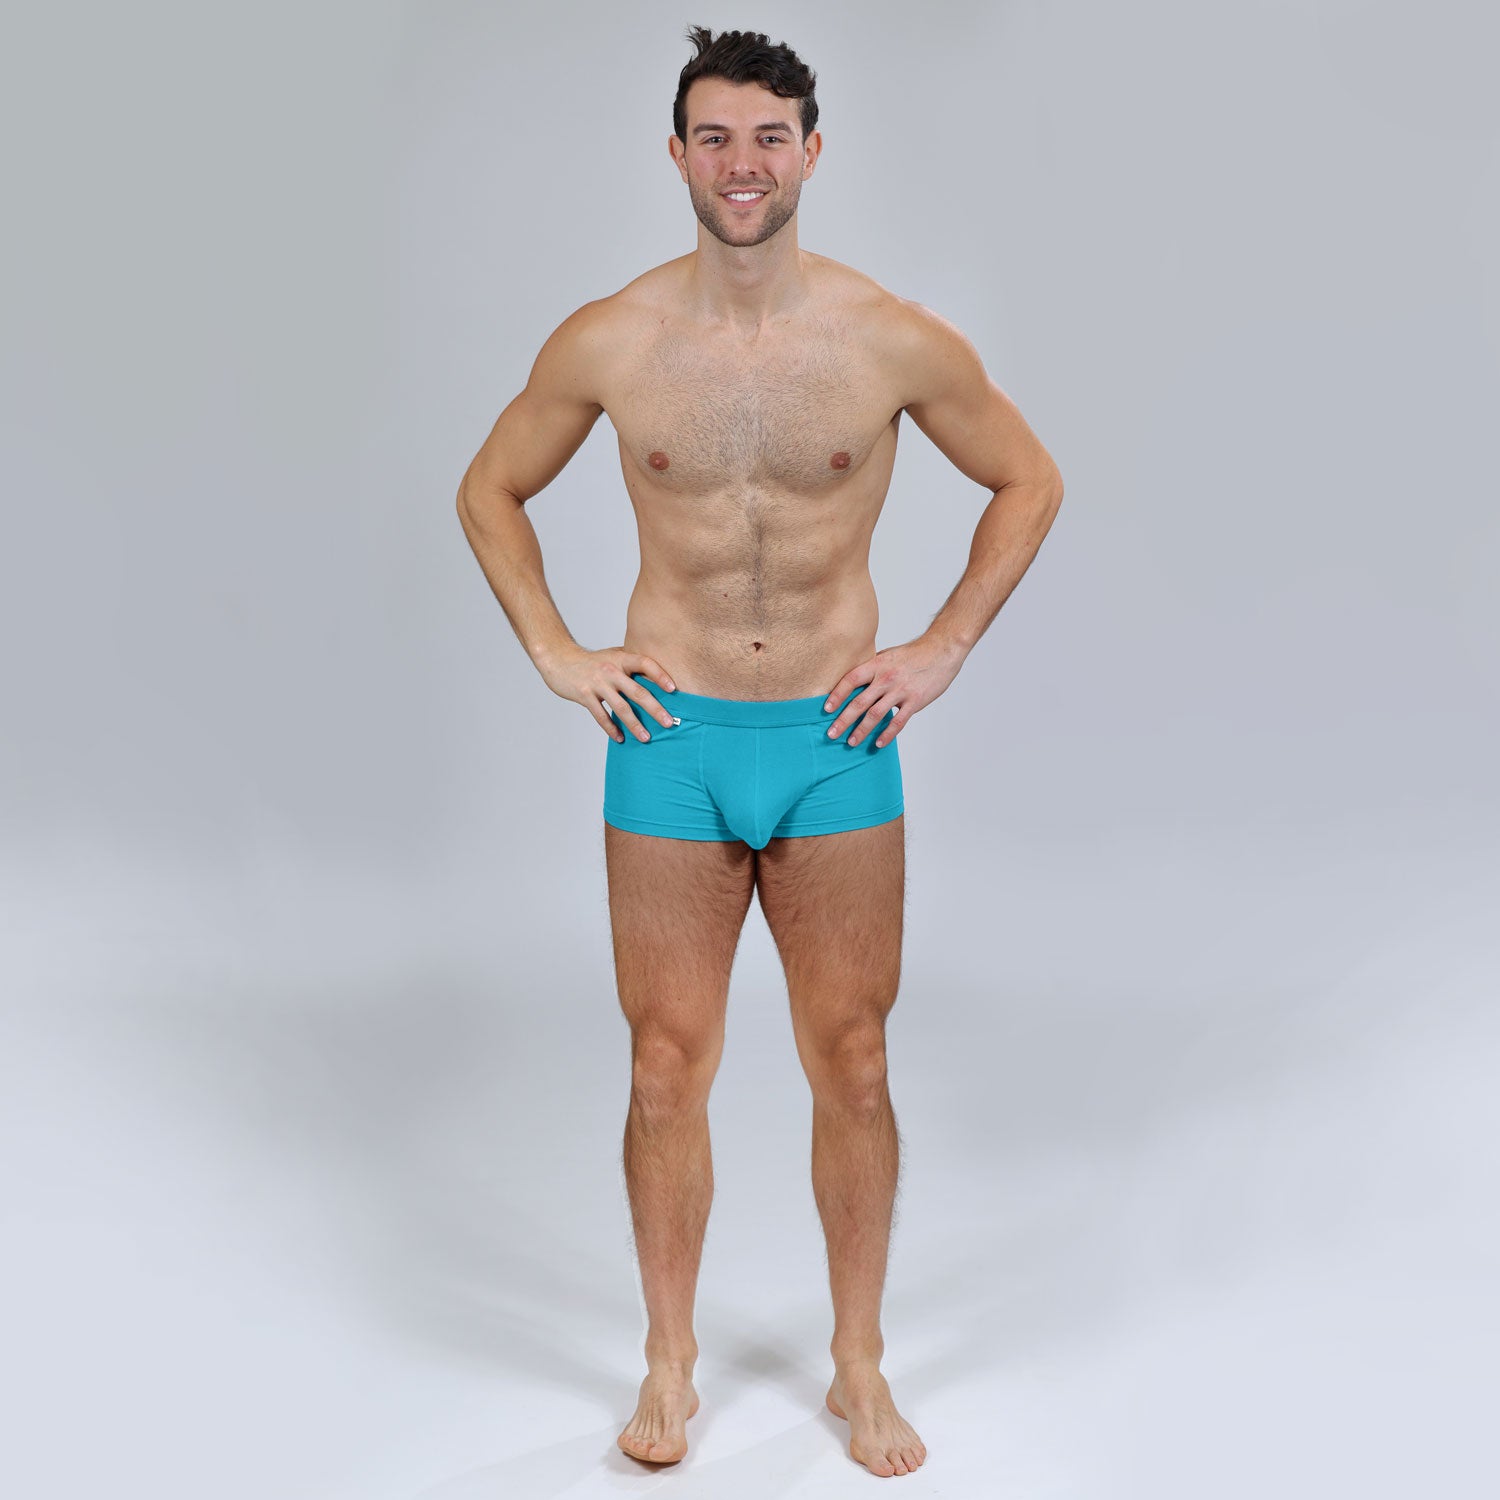 The Limited Edition Blue Atoll Trunks for men in the USA and Canada